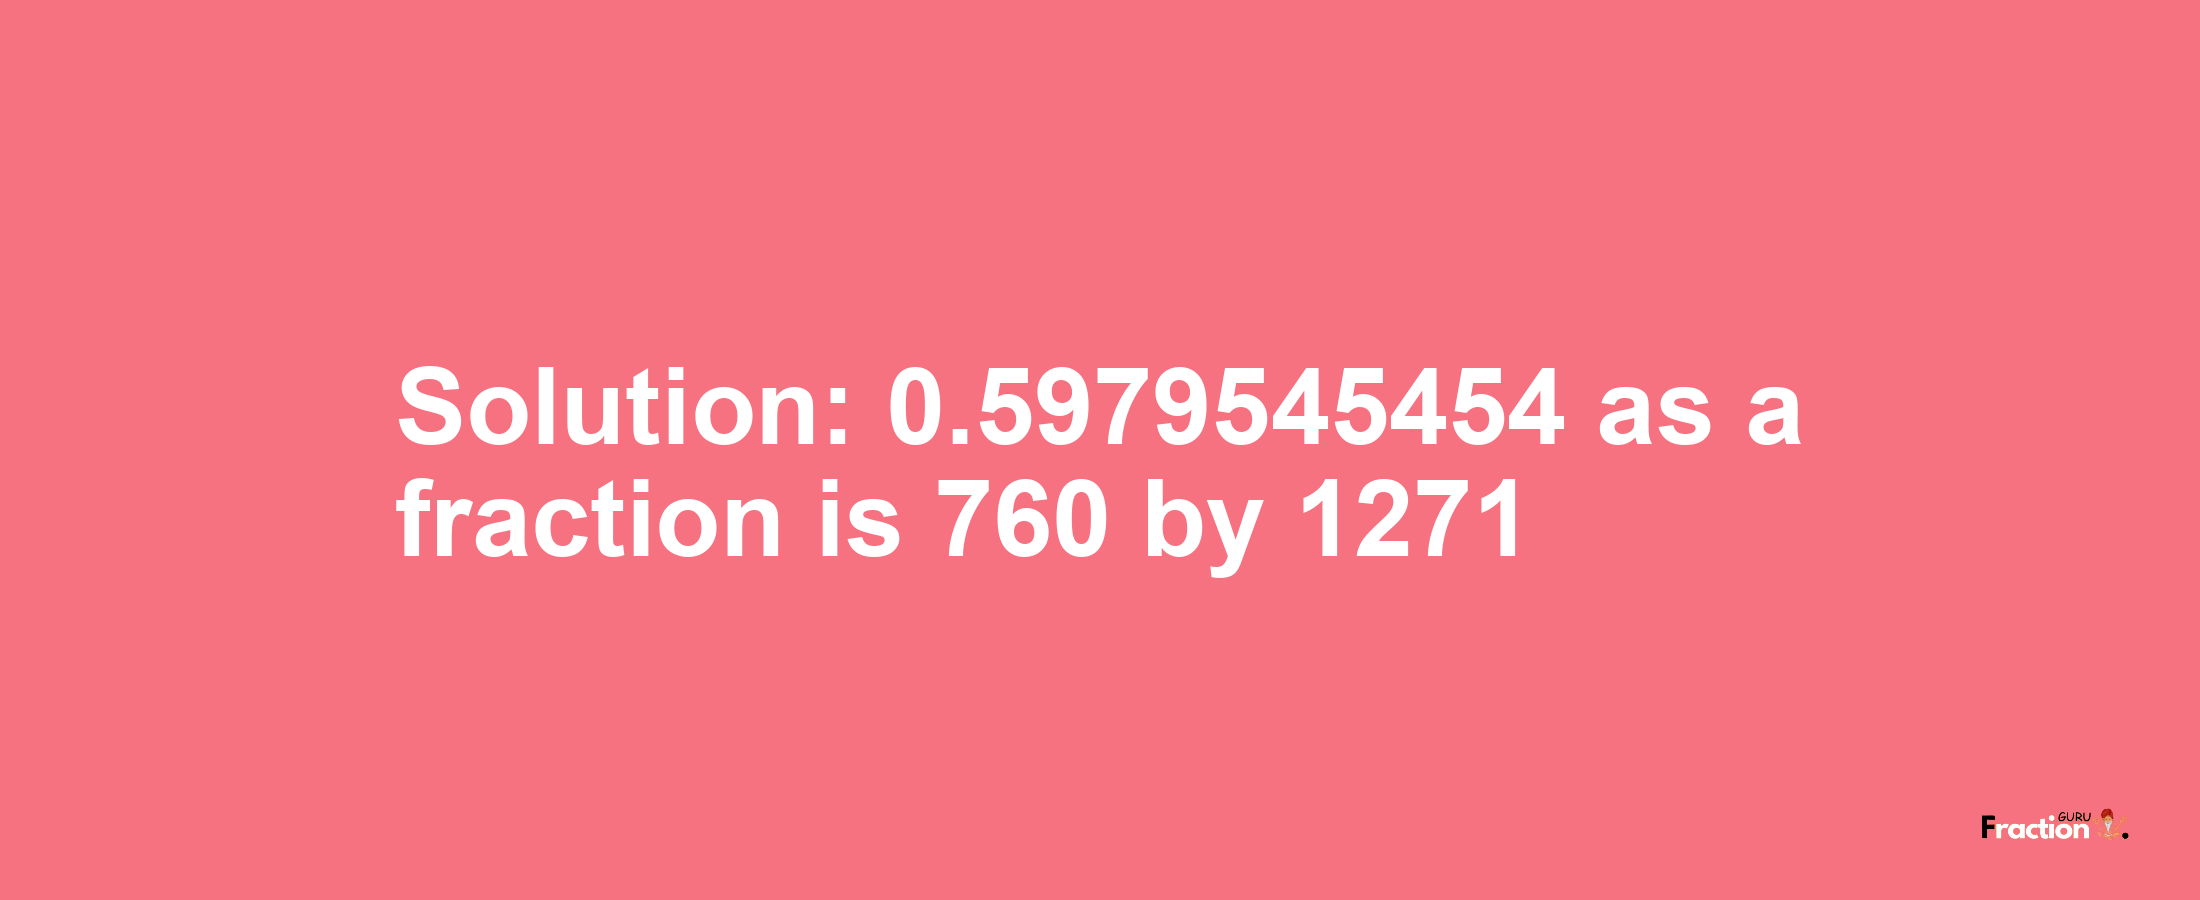 Solution:0.5979545454 as a fraction is 760/1271